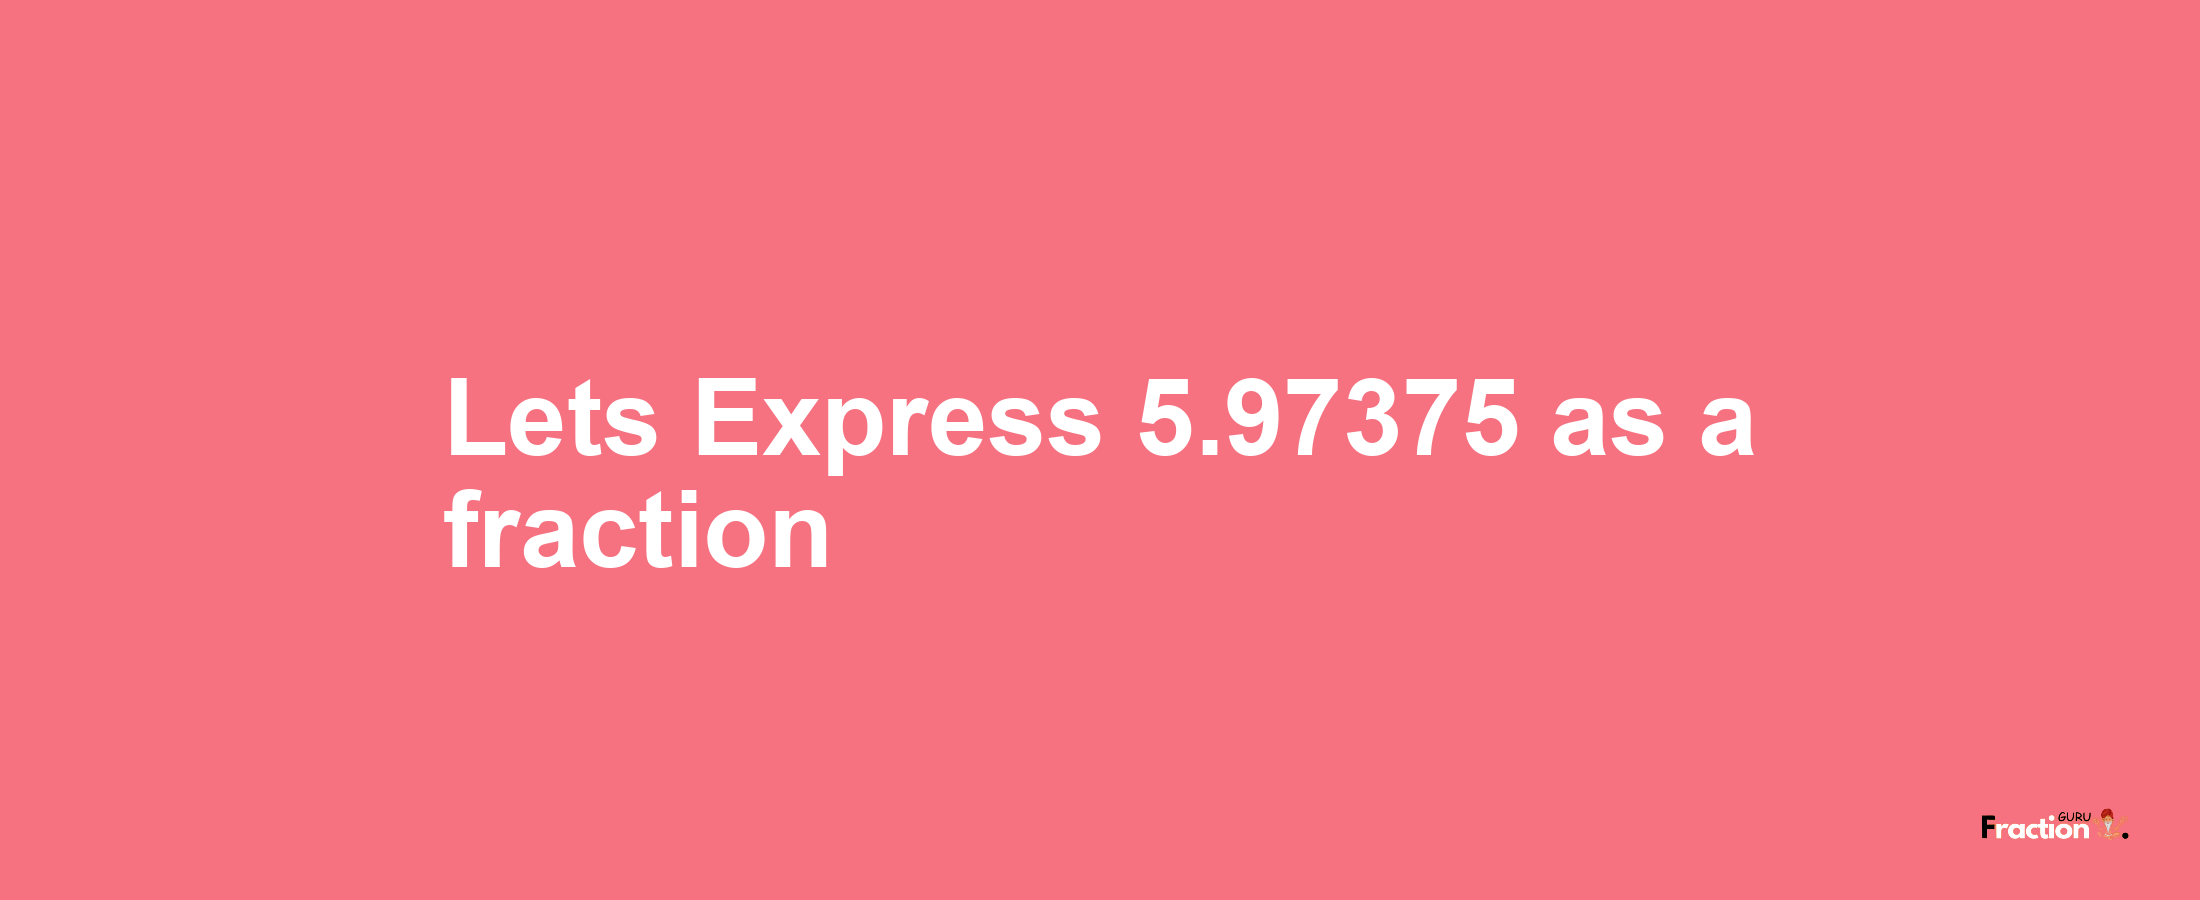 Lets Express 5.97375 as afraction